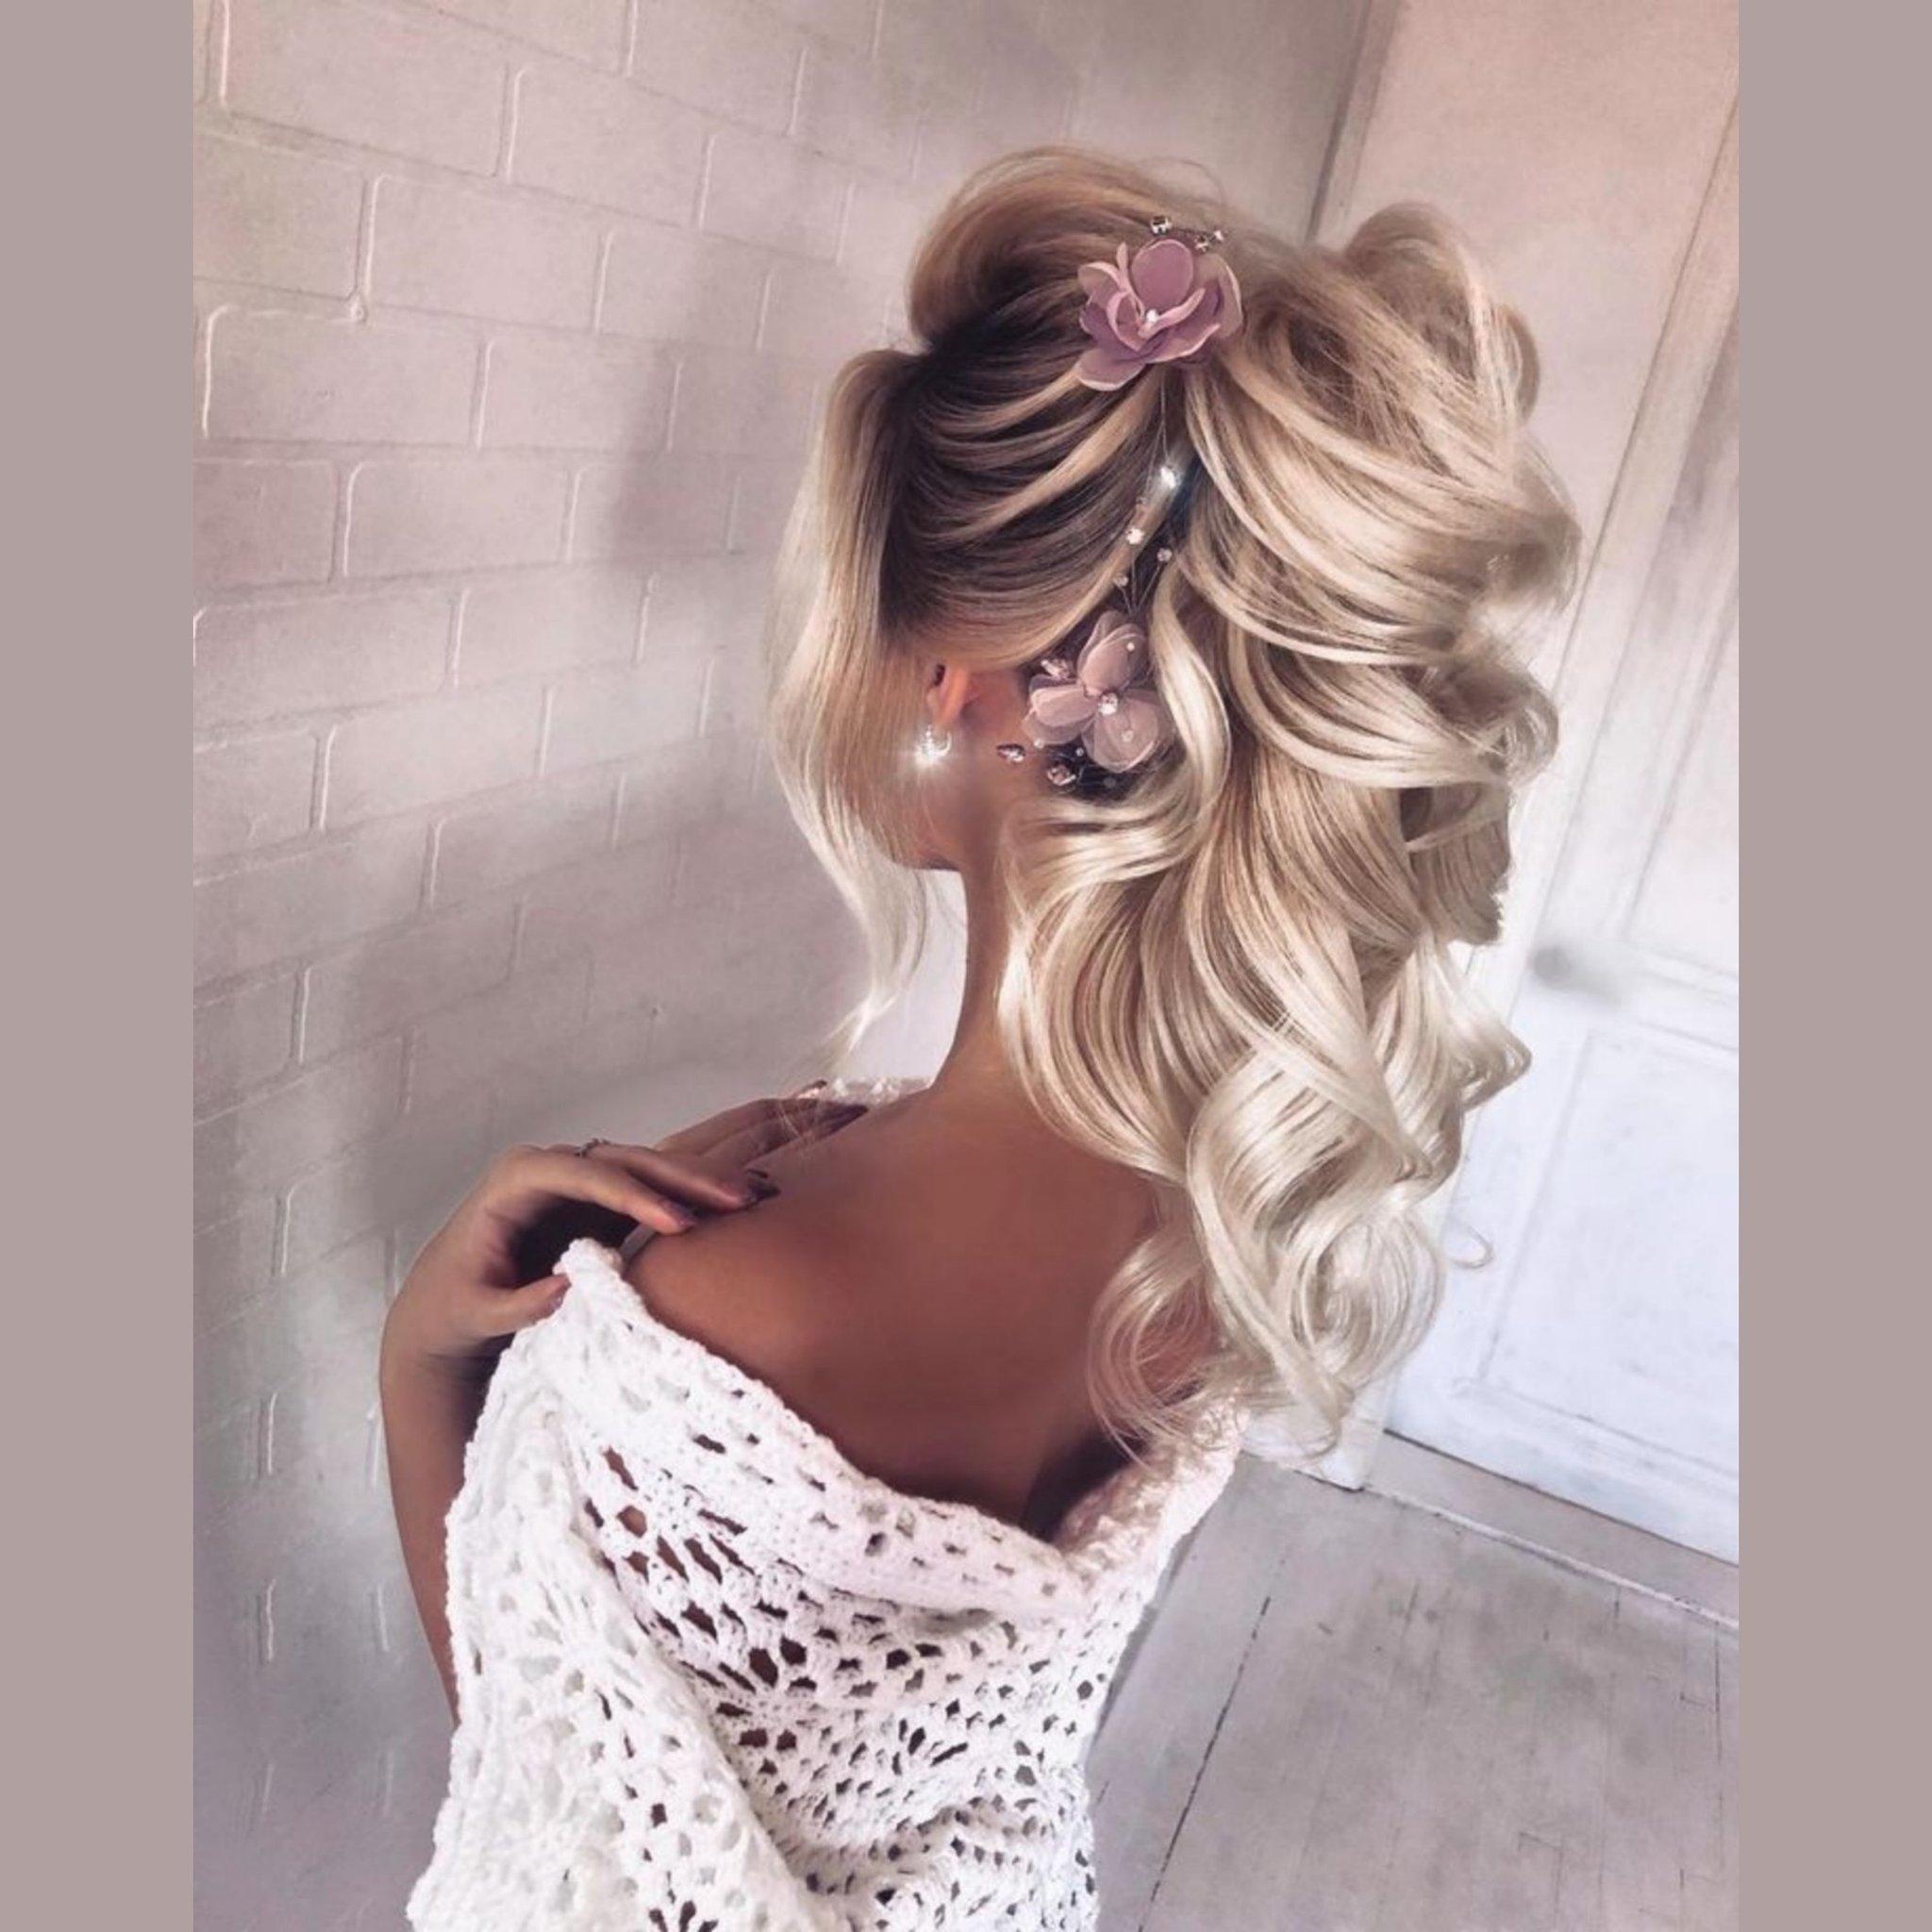 Pinterest | Hairstyle, Easy hairstyles, Party hairstyles